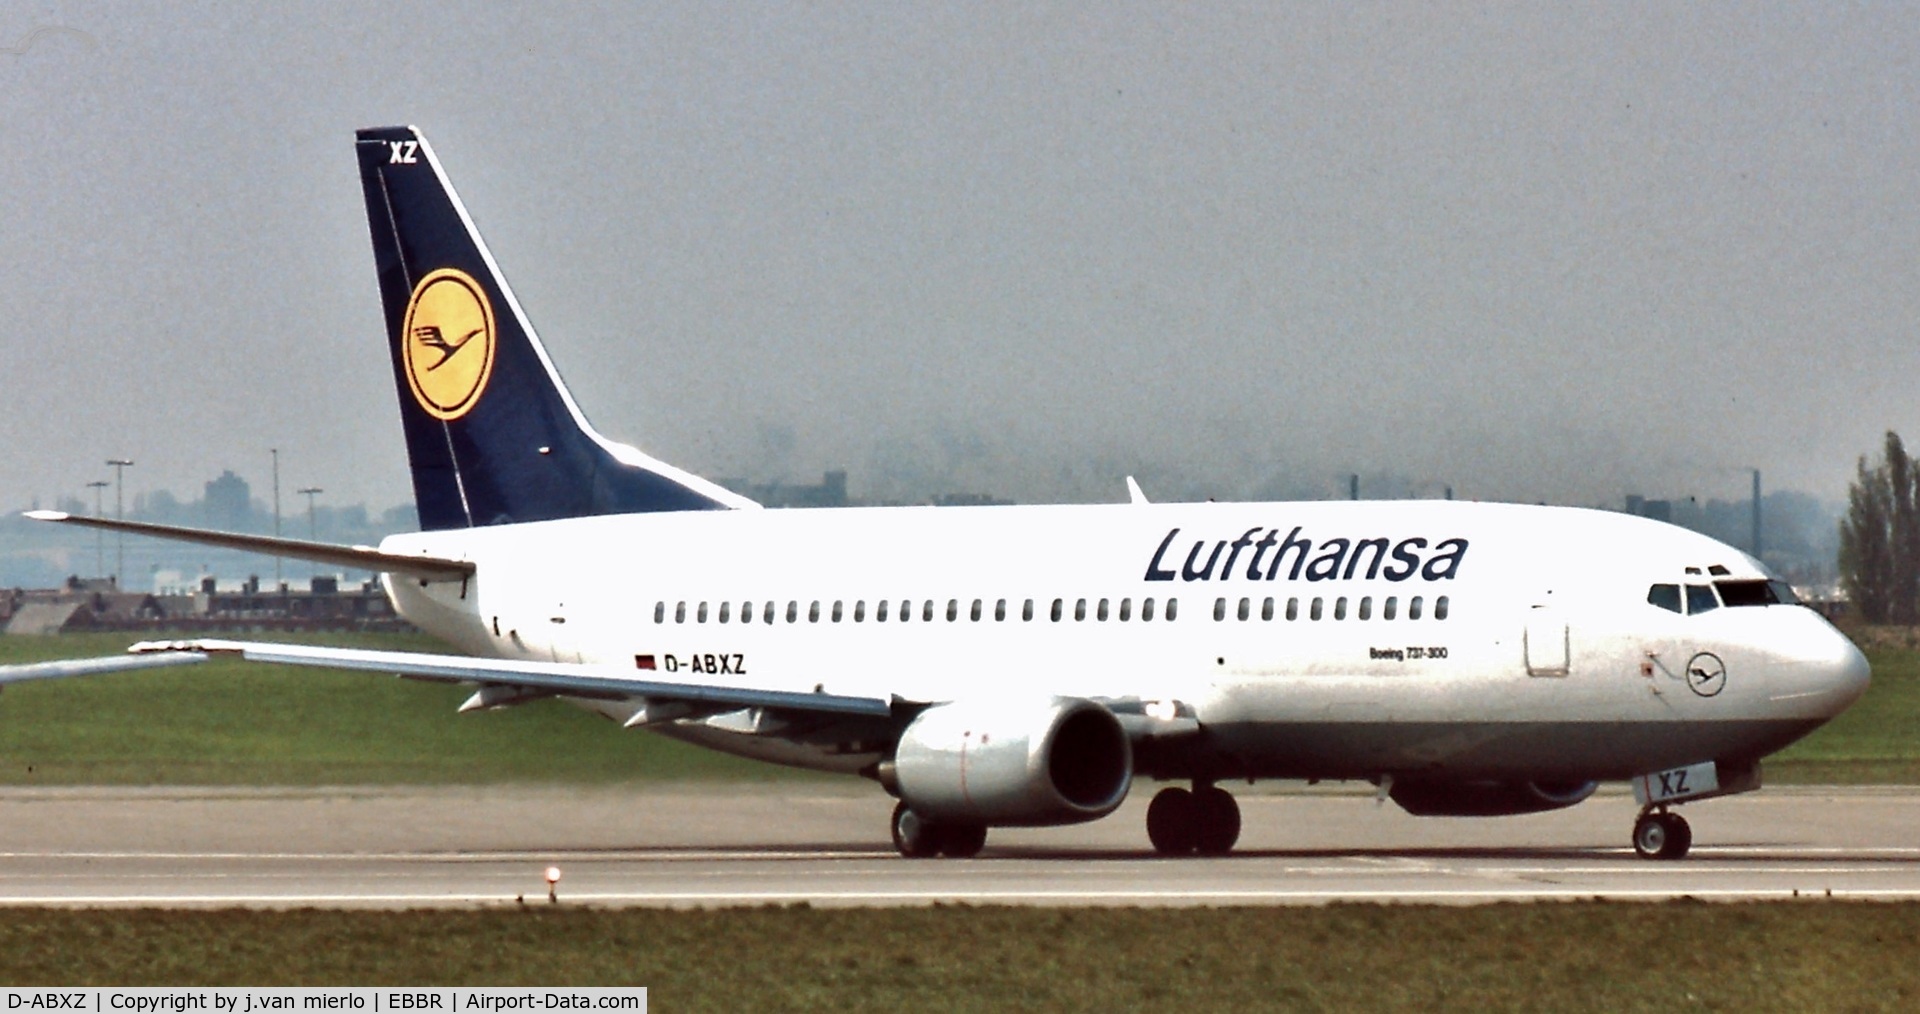 D-ABXZ, 1990 Boeing 737-330 C/N 24564, Awaiting clearance for rwy 02 at Brussels